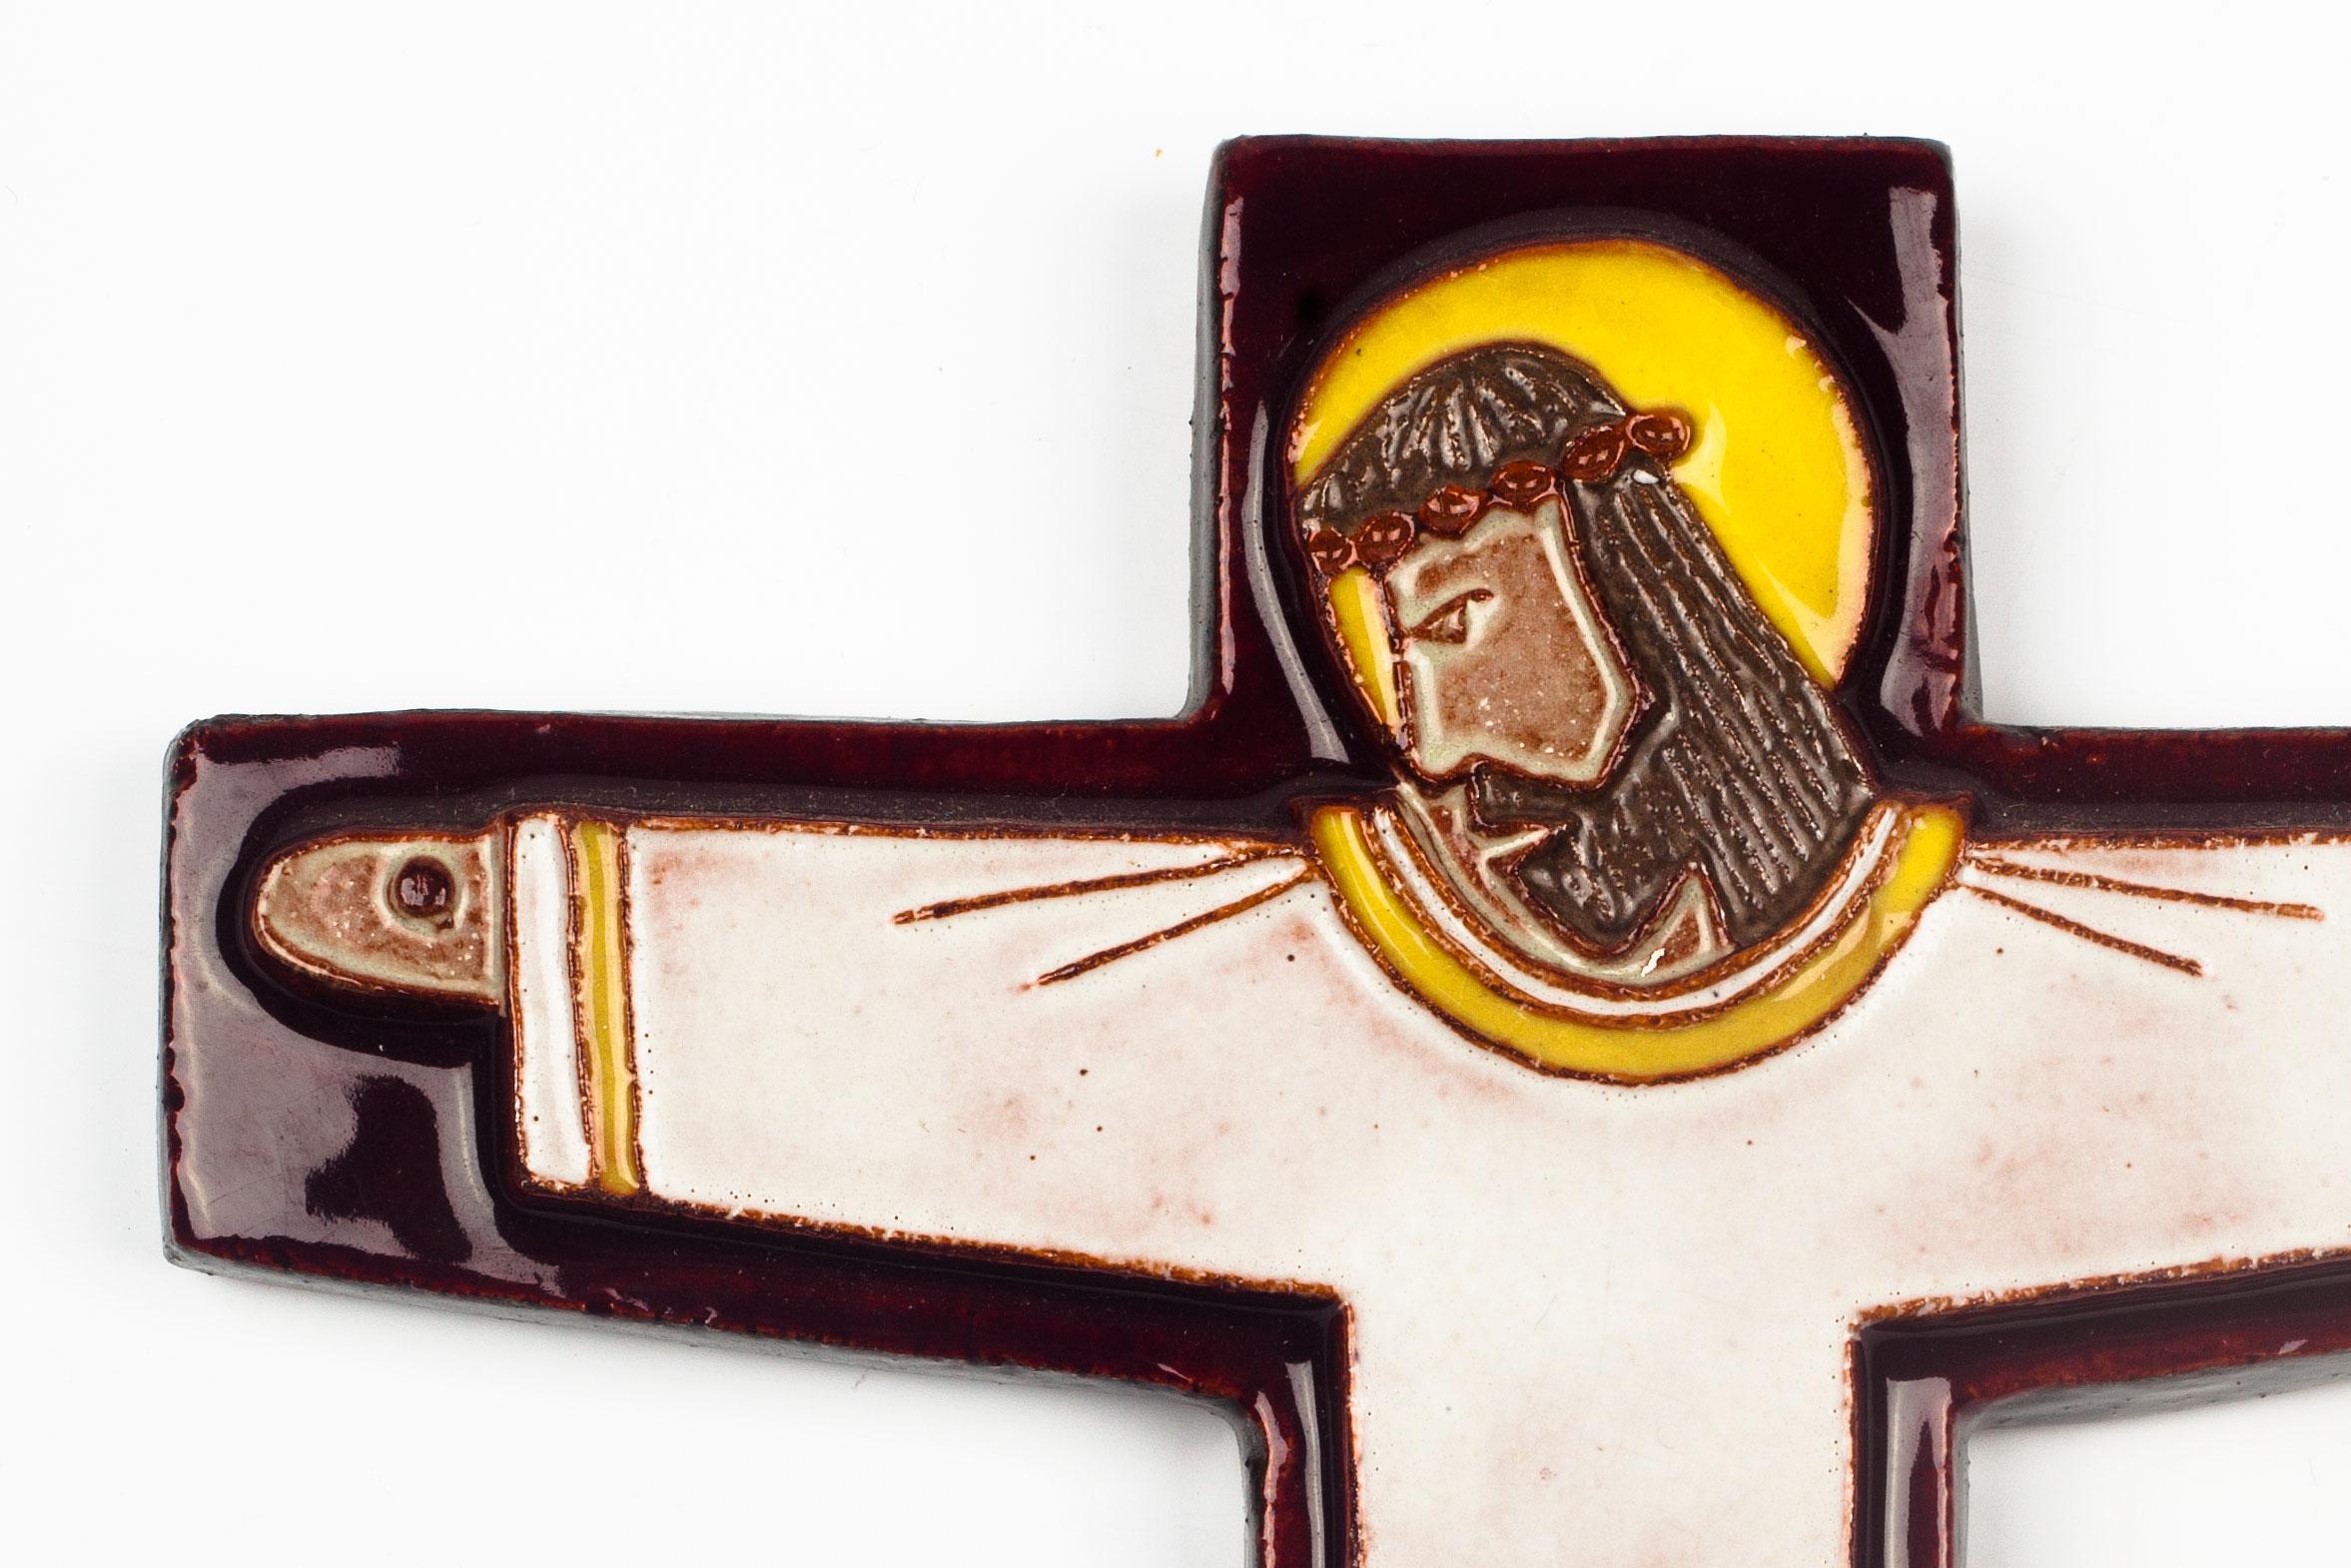 Crucifix in glazed ceramic, handmade made in Belgium in the 1970s. Red-brown, burgundy cross with yellow, white, brown raised christ figure at its center.

This piece is part of a large ceramic crucifix collection, all made in Belgium between the